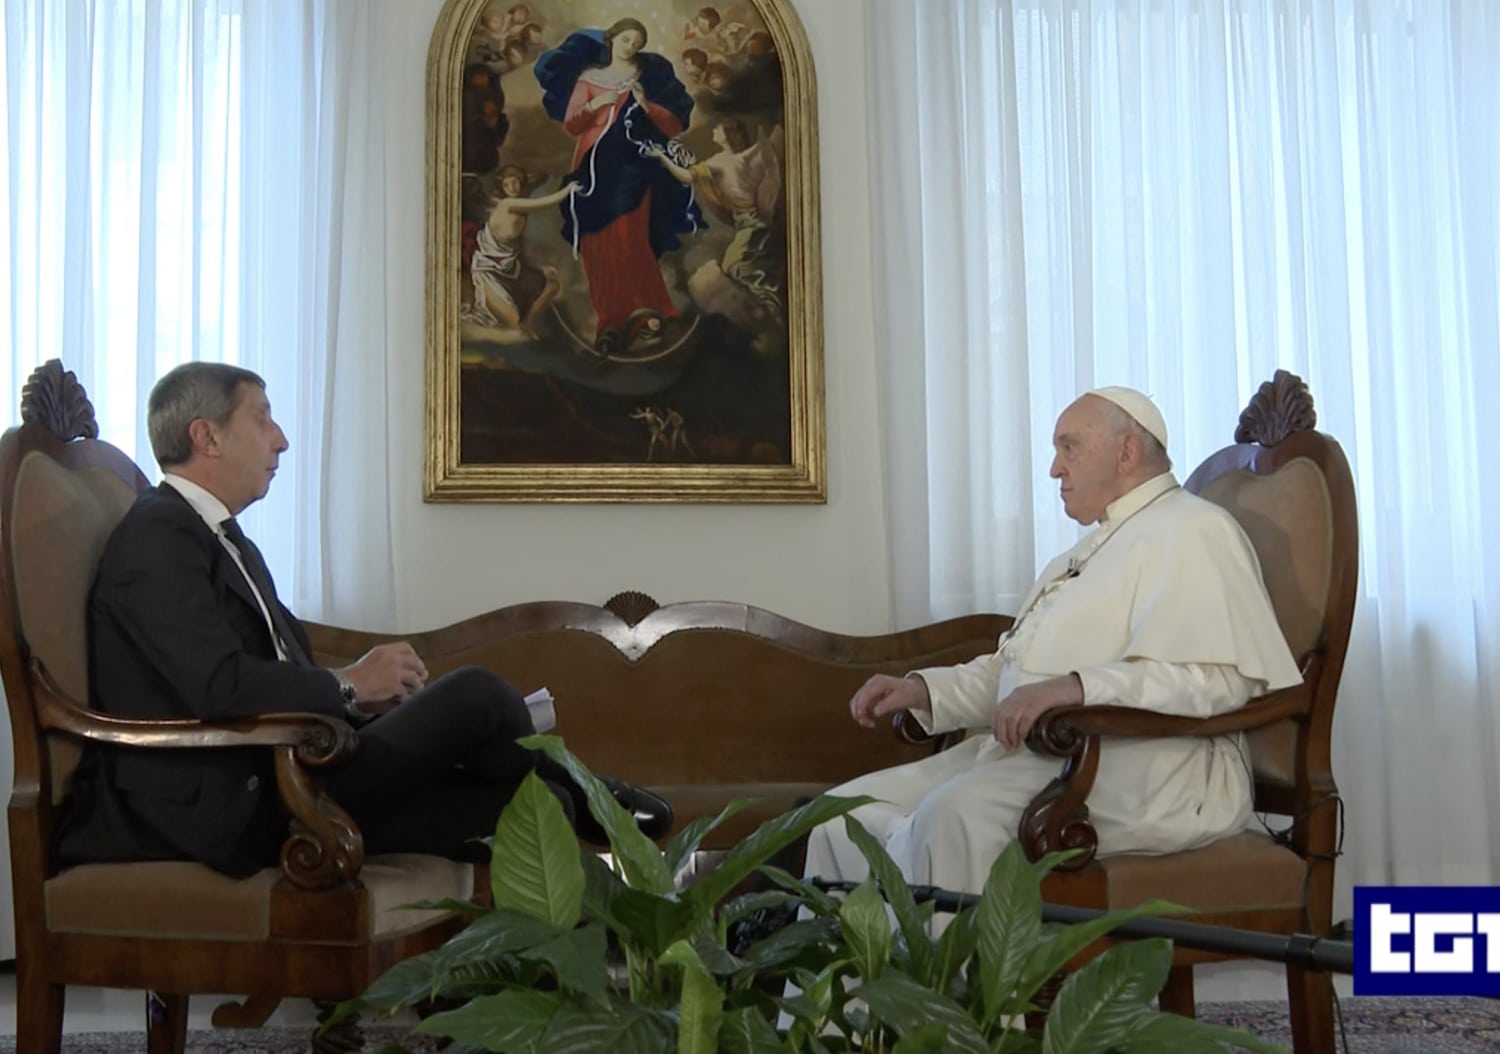 Pope interview